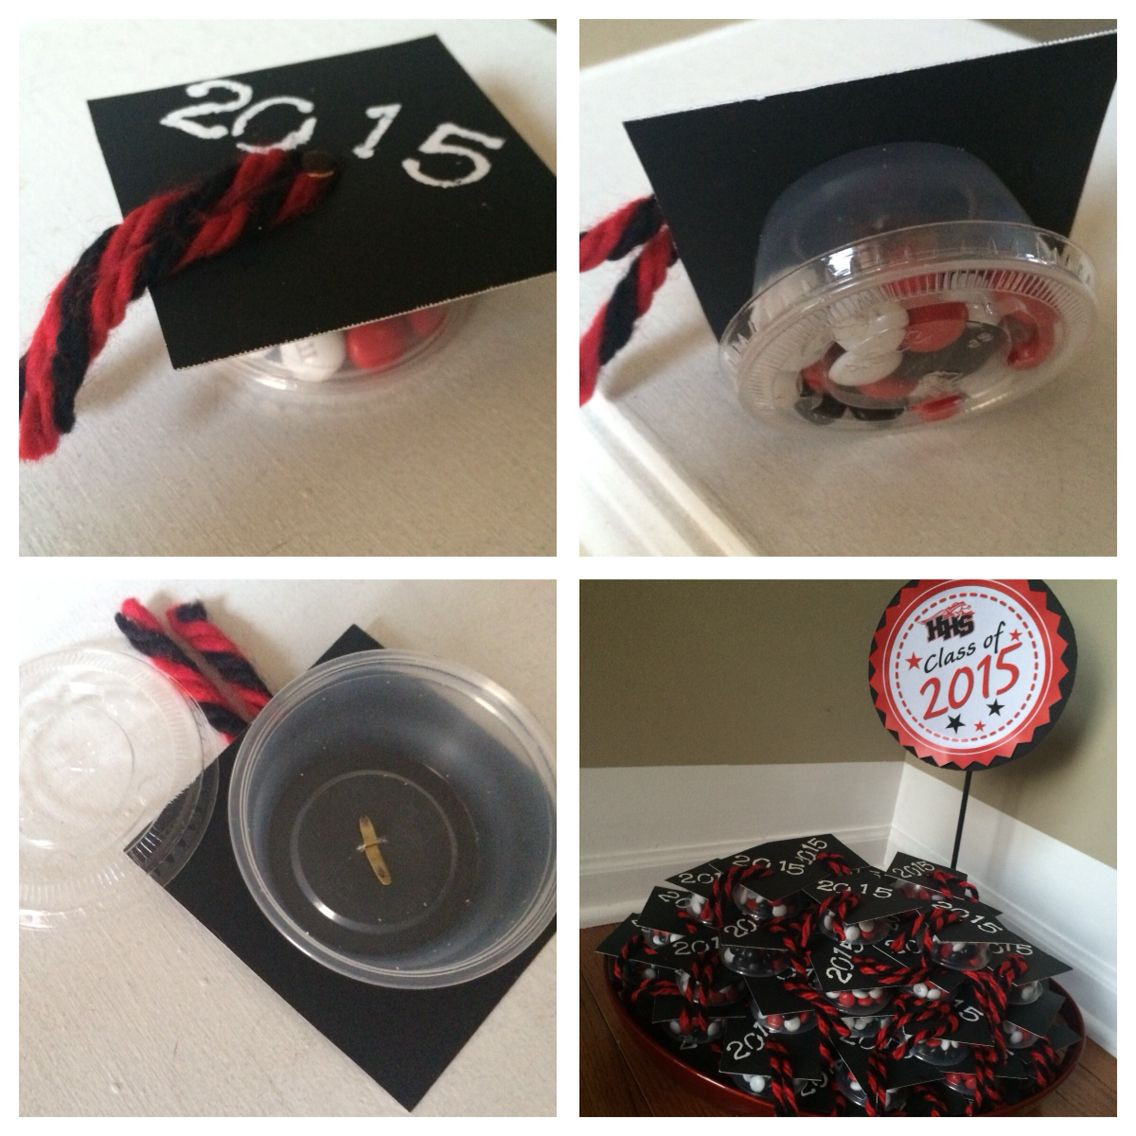 College Graduation Party Favors Ideas
 Graduation Party Favors I made these using 3"x3" black